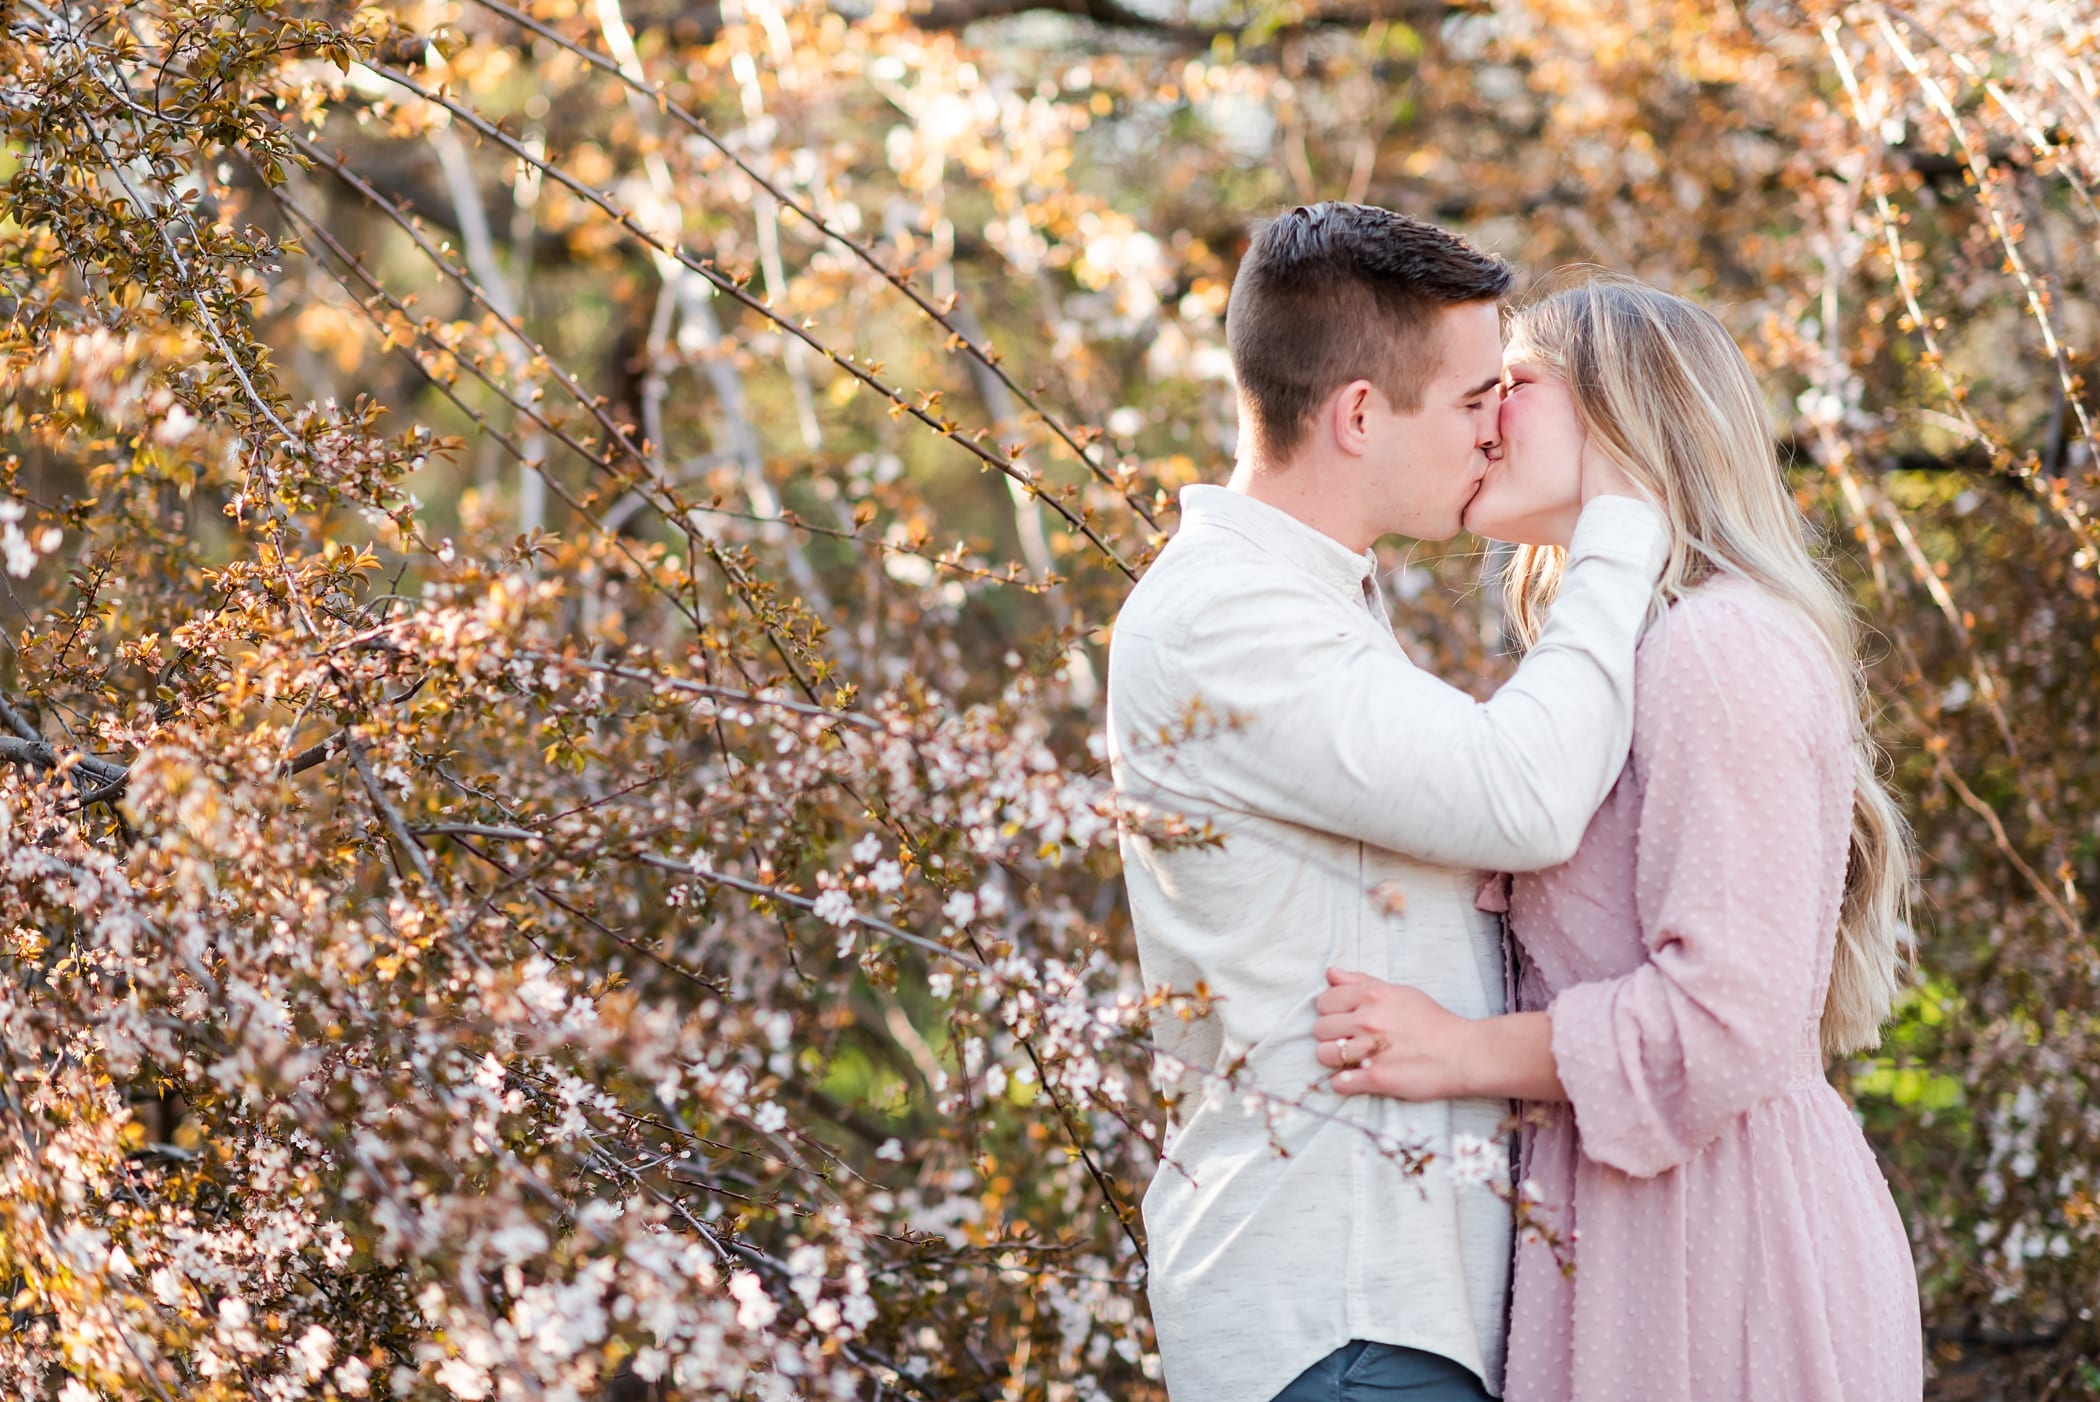 Blossom spring engagements in blush dress and button up shirt at Boise Idaho